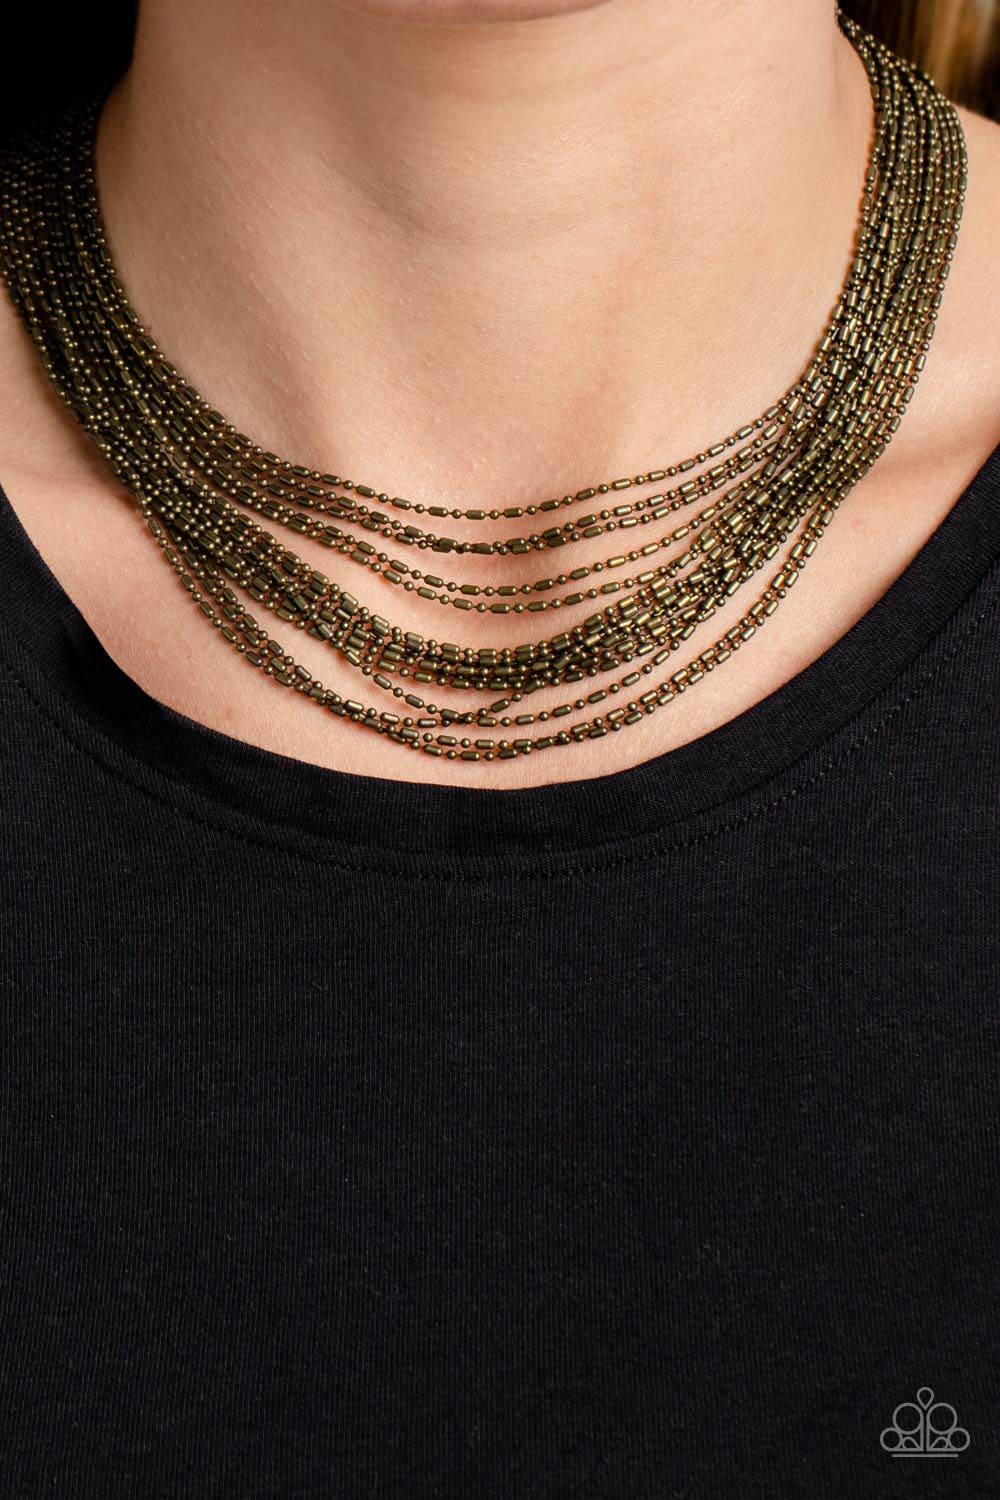 Paparazzi Accessories - Cascading Chains - Brass Necklace - Bling by JessieK